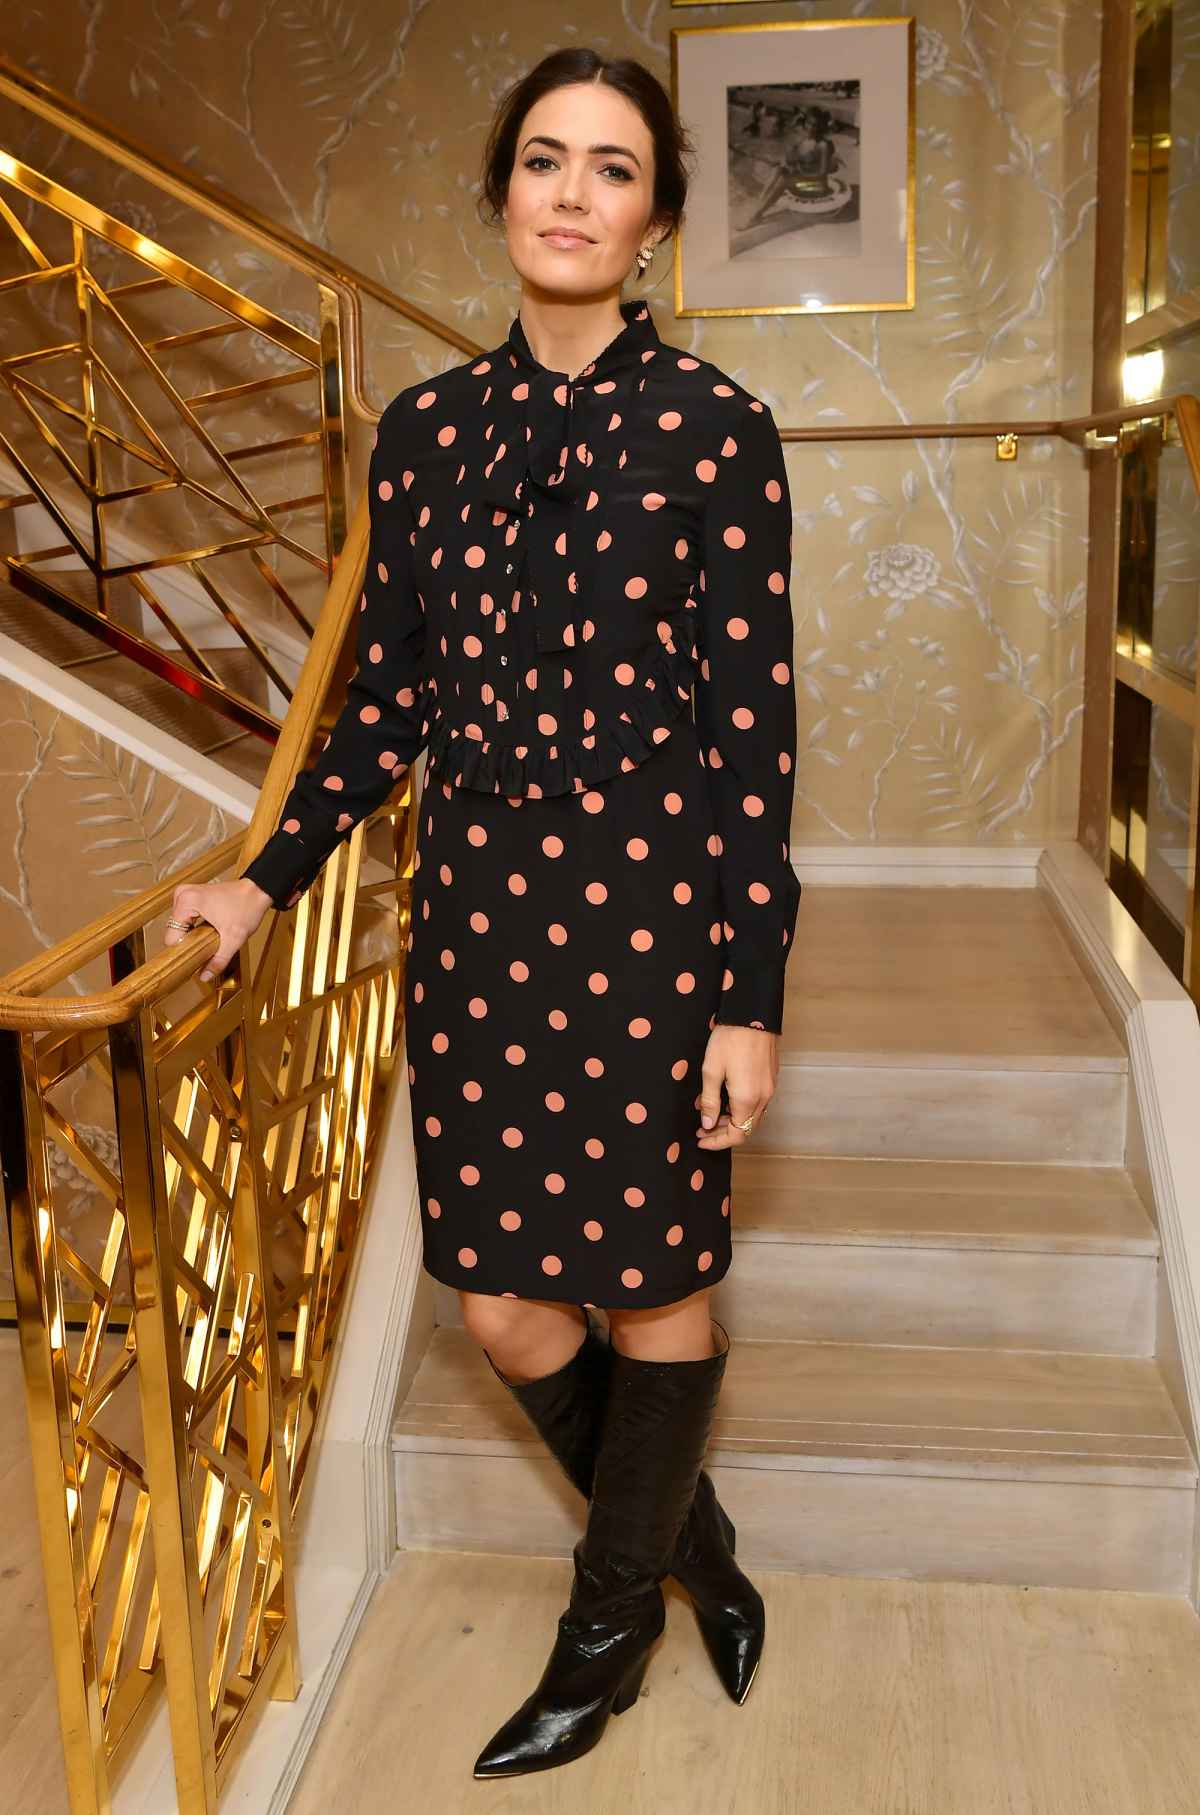 Celebs in Tory Burch: Mindy Kaling, Emily Blunt, More